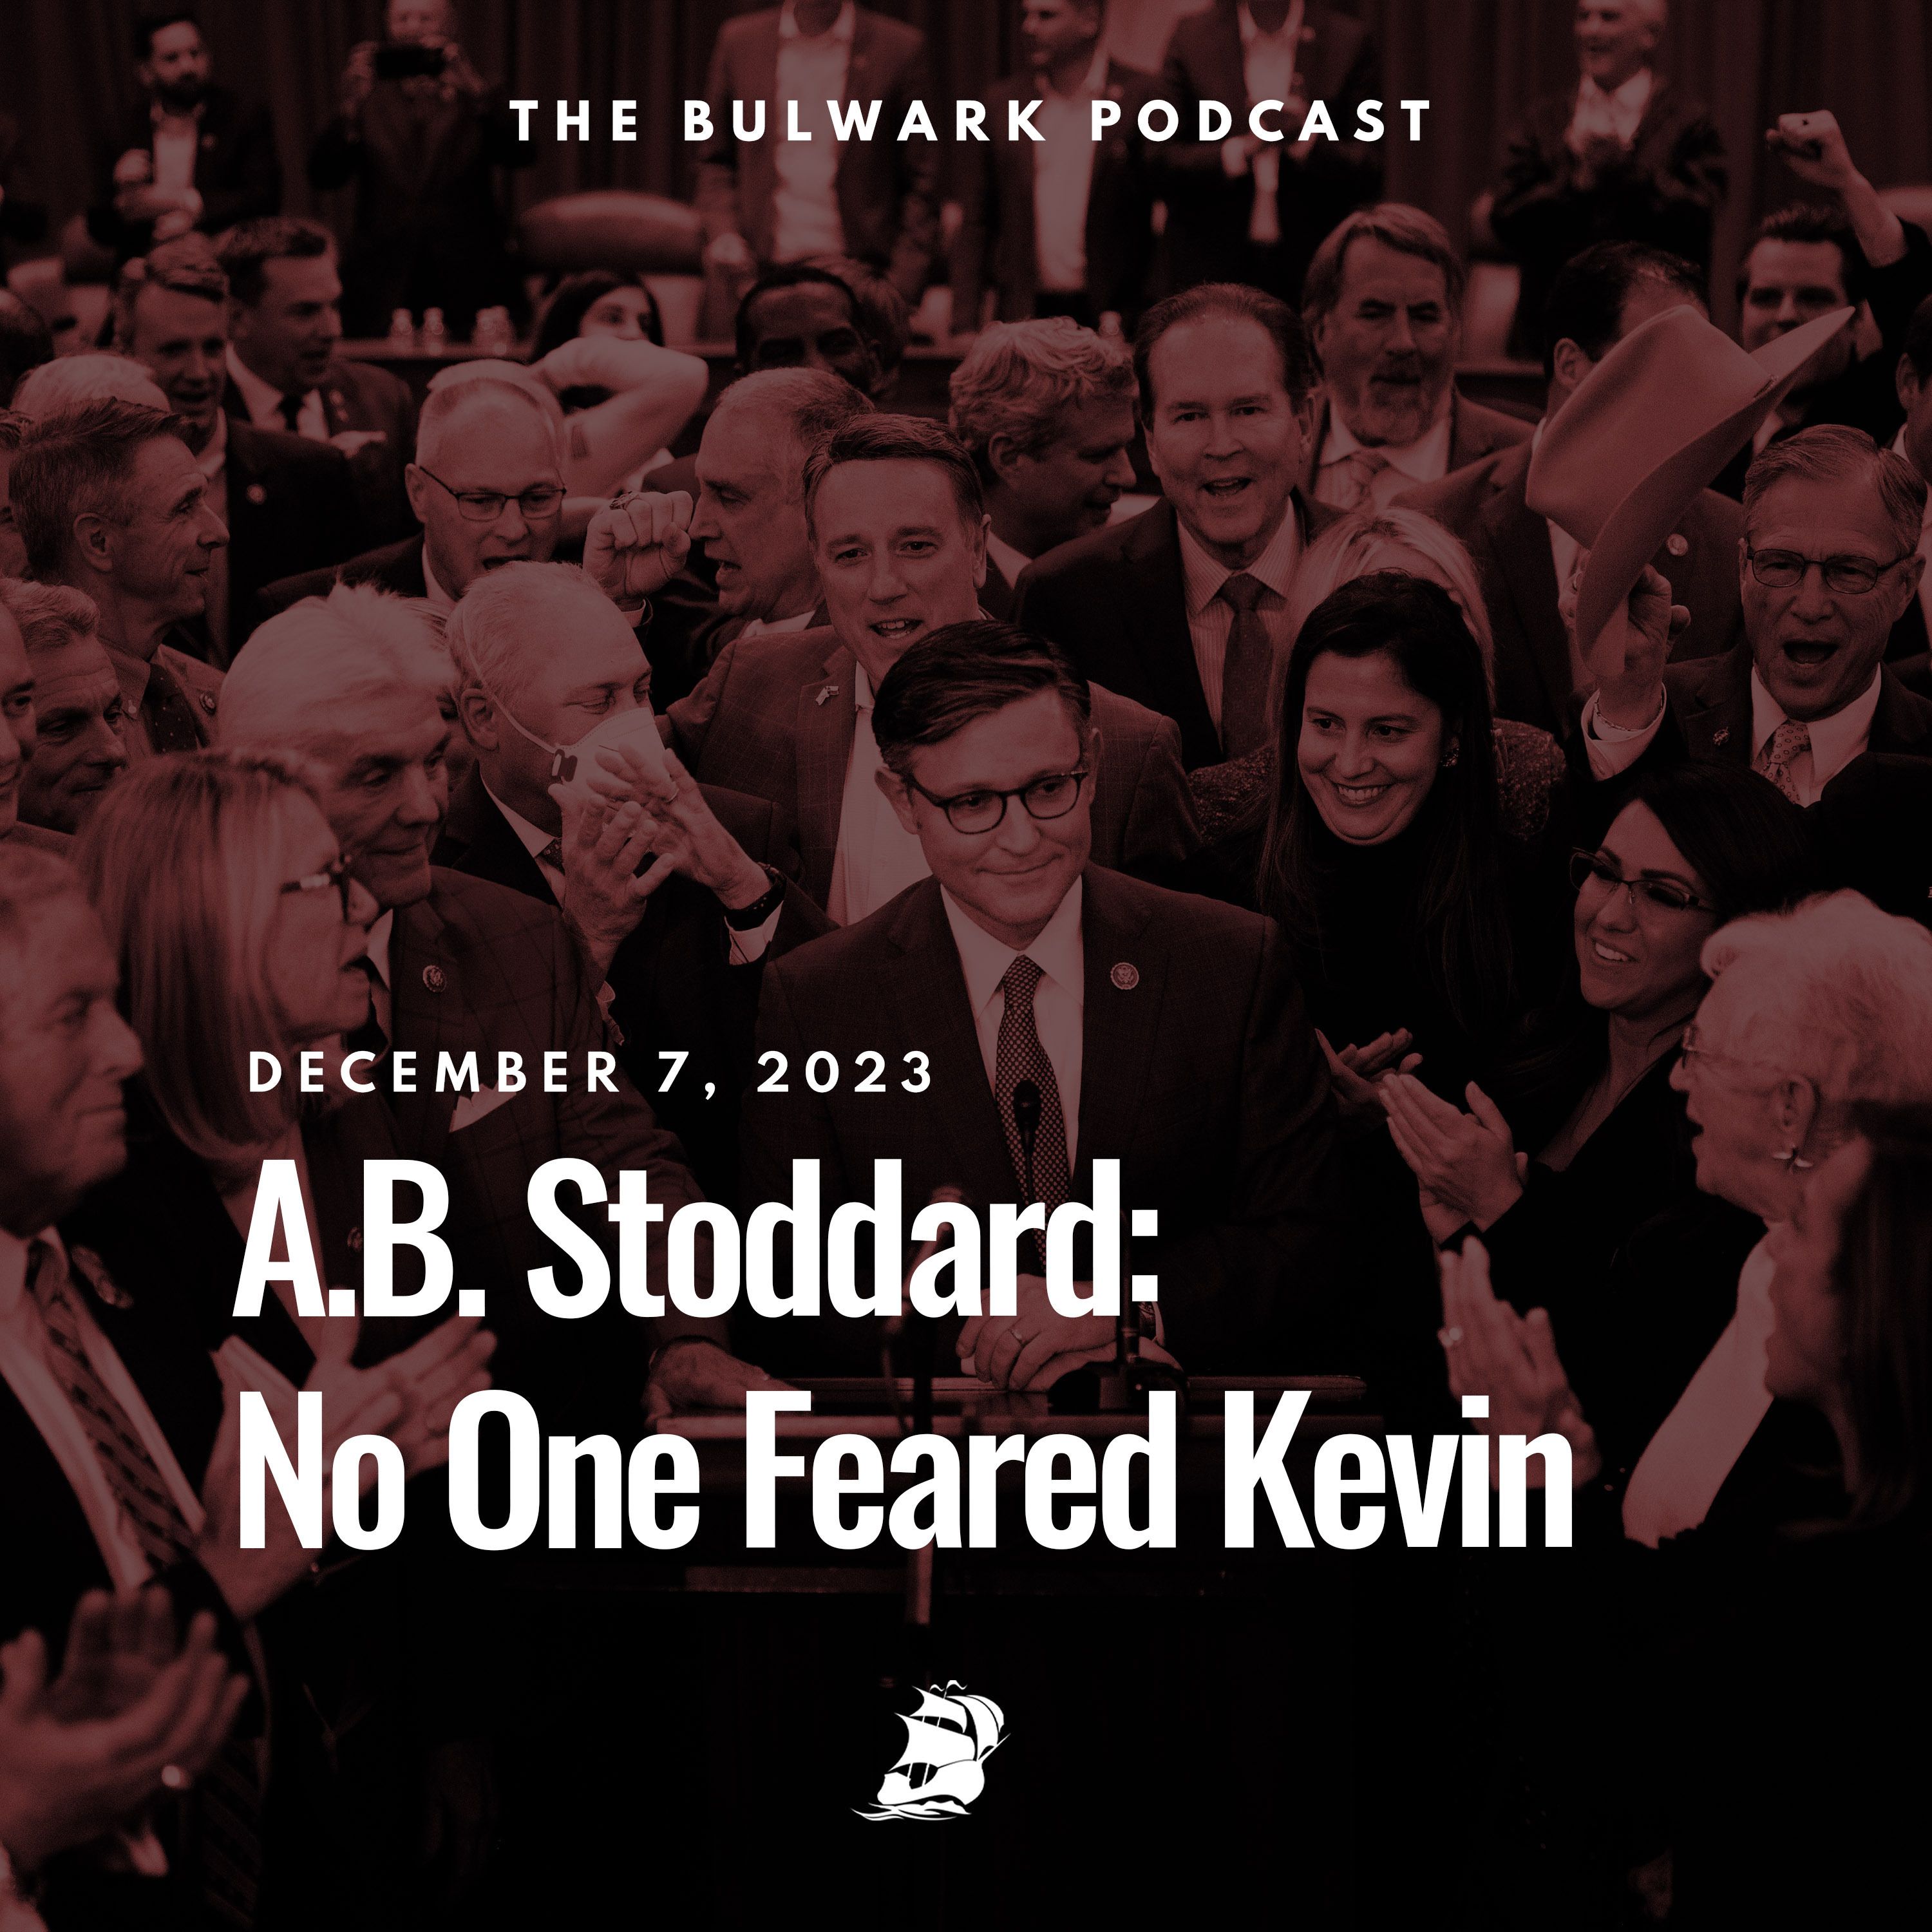 A.B. Stoddard: No One Feared Kevin by The Bulwark Podcast